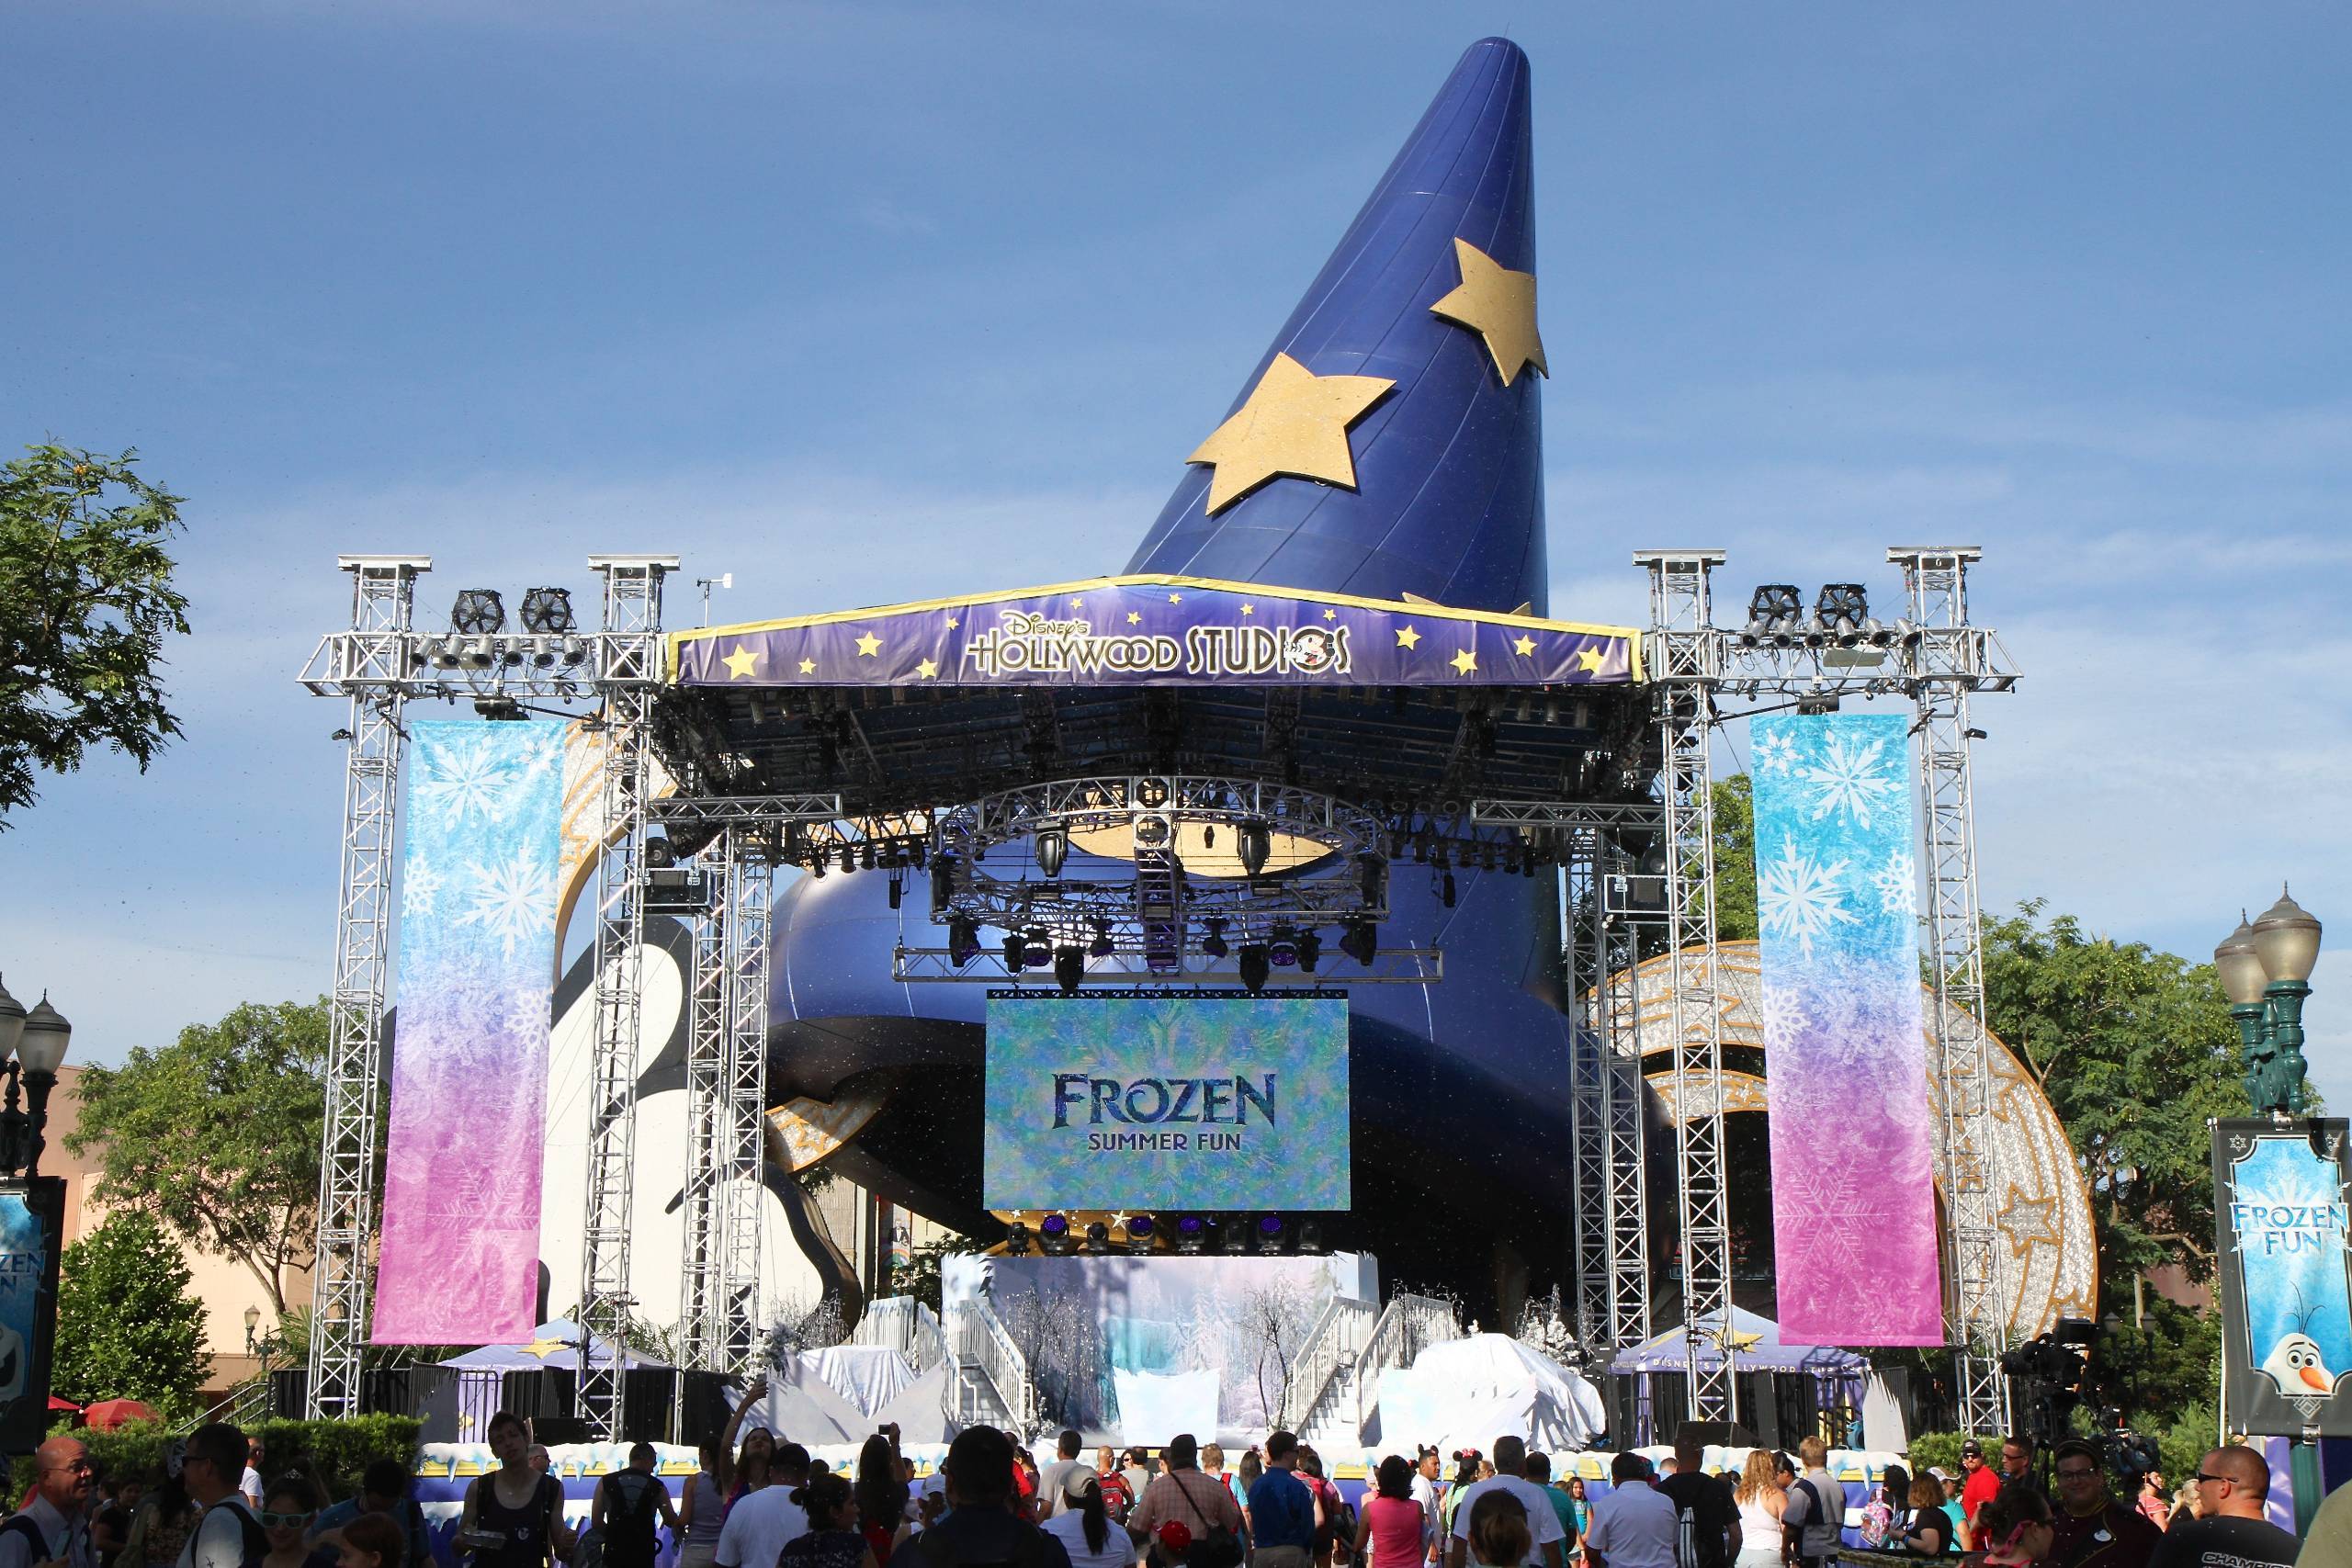 PHOTOS and VIDEO - Opening day at Frozen Summer Fun - LIVE at Disney's Hollywood Studios